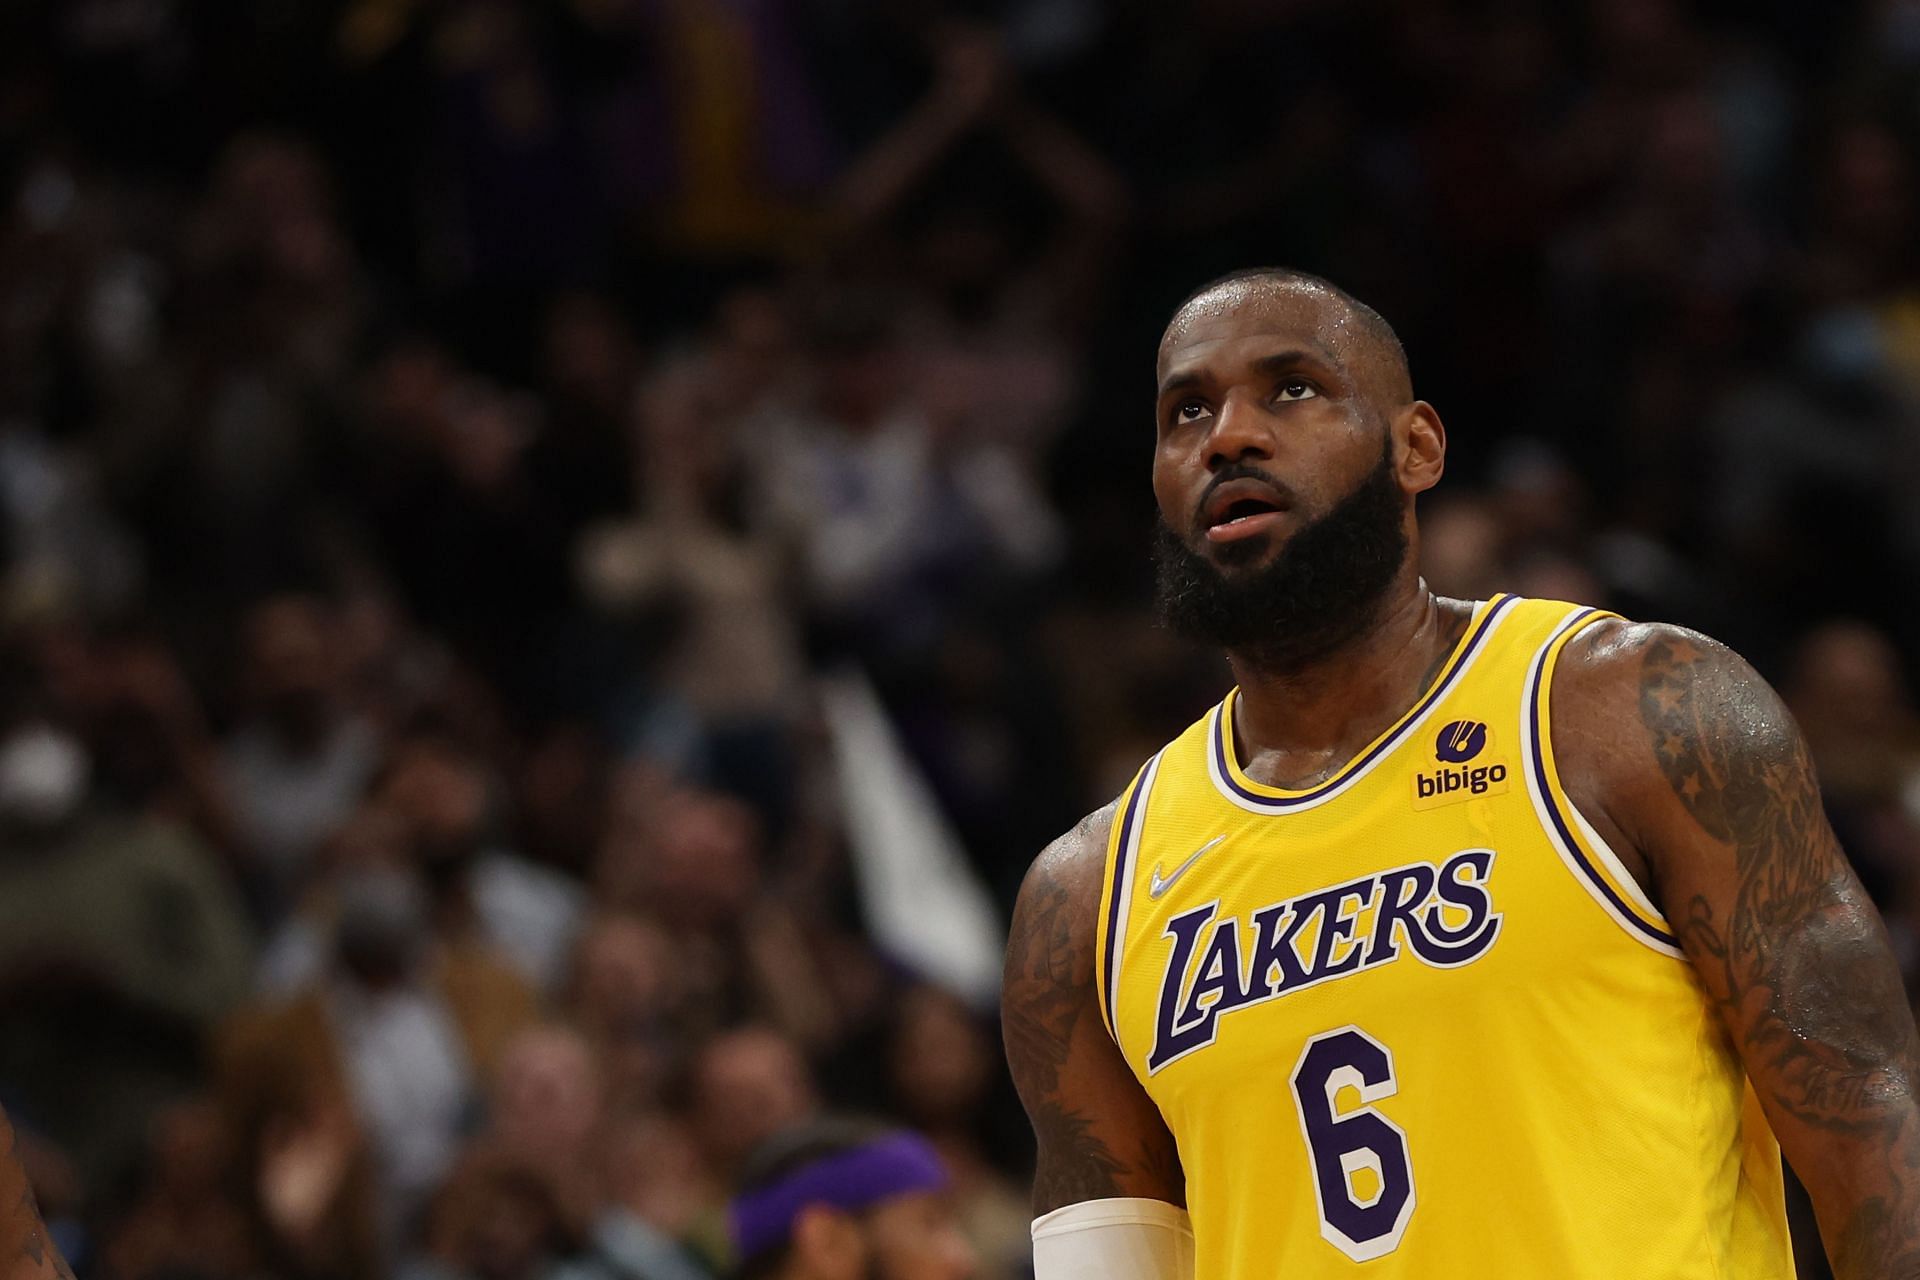 LeBron's L.A. Lakers have become Jordan's Washington Wizards